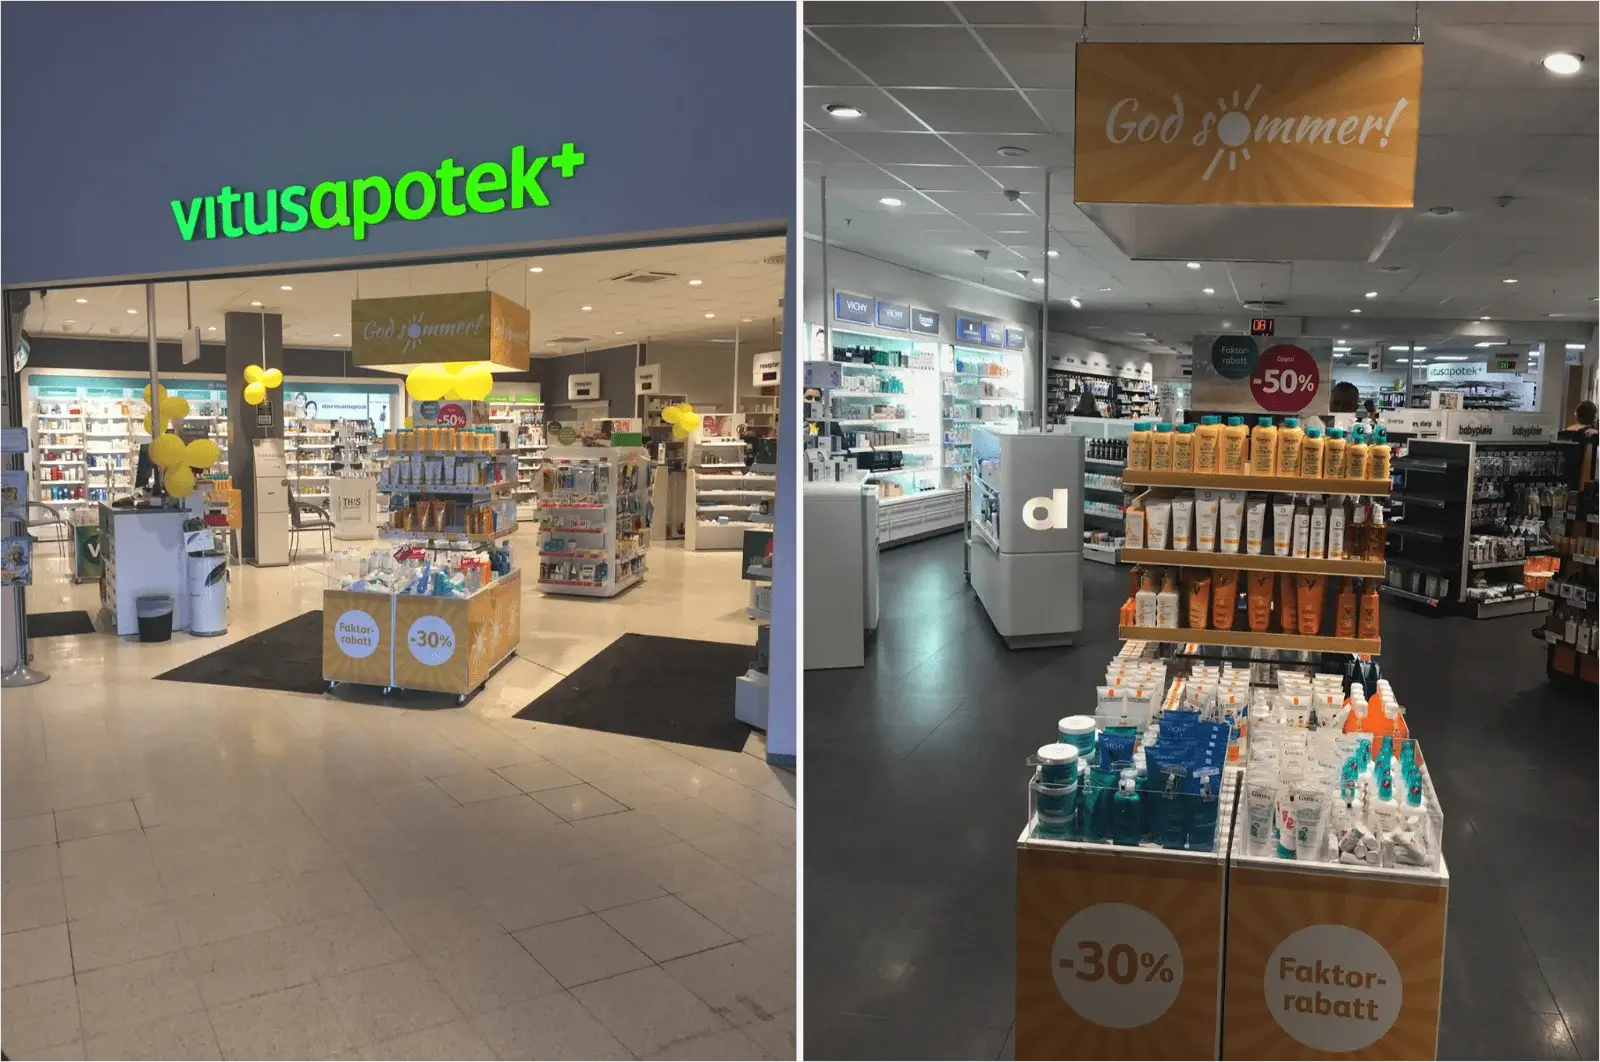 VITUSAPOTEK FAST TRACK CAMPAIGN: In-store promotions